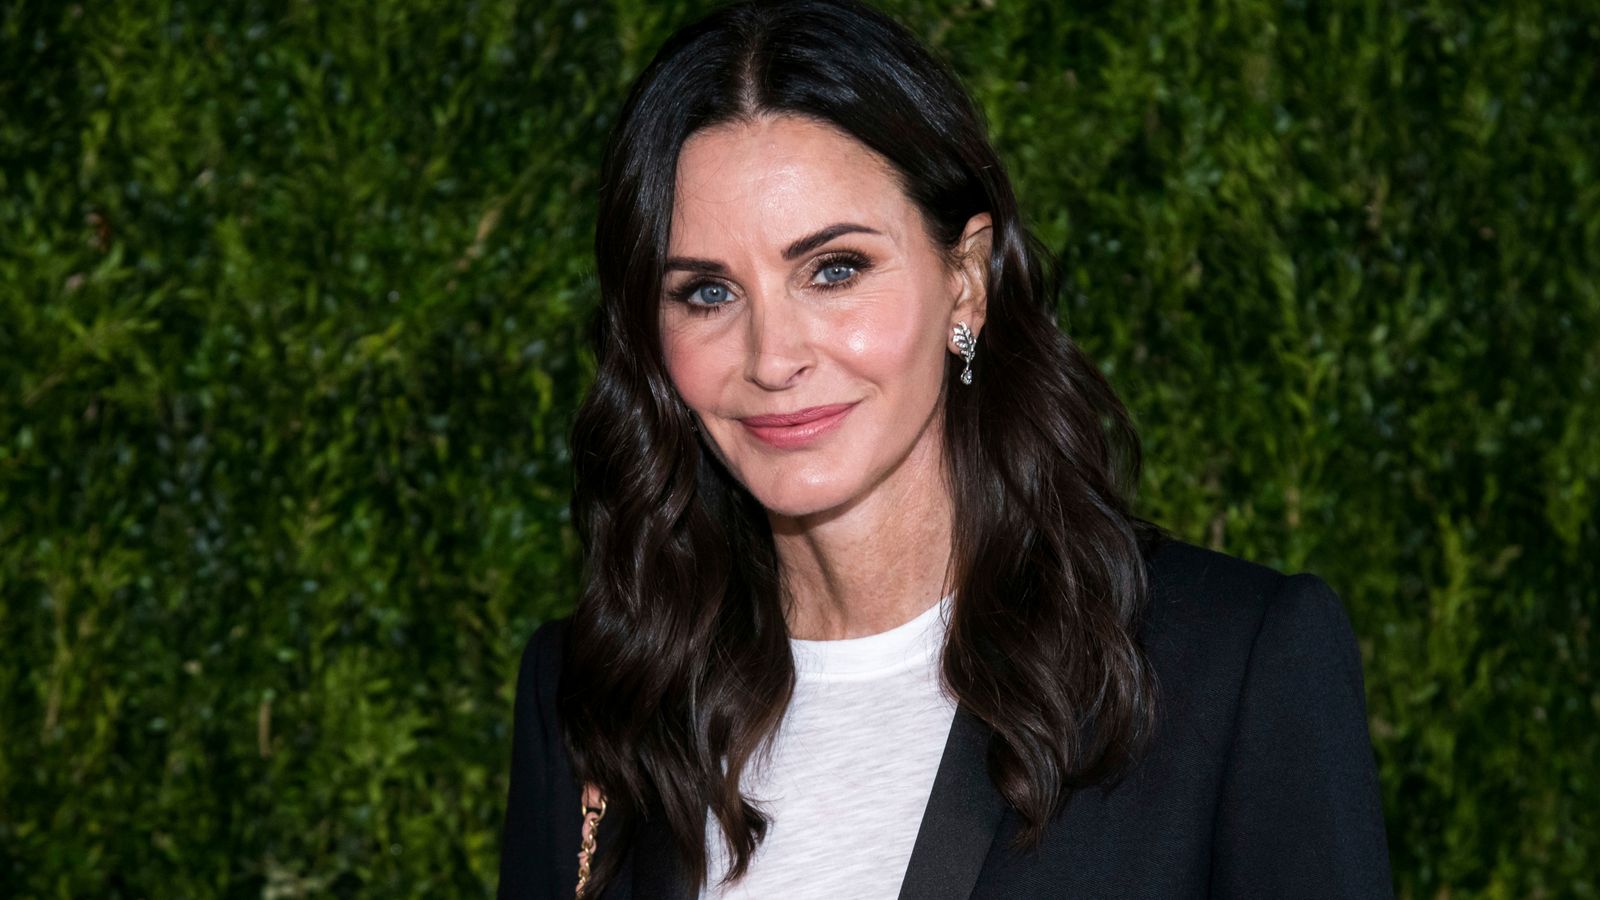 Courteney Cox says cosmetic injections left her looking 'really strange'